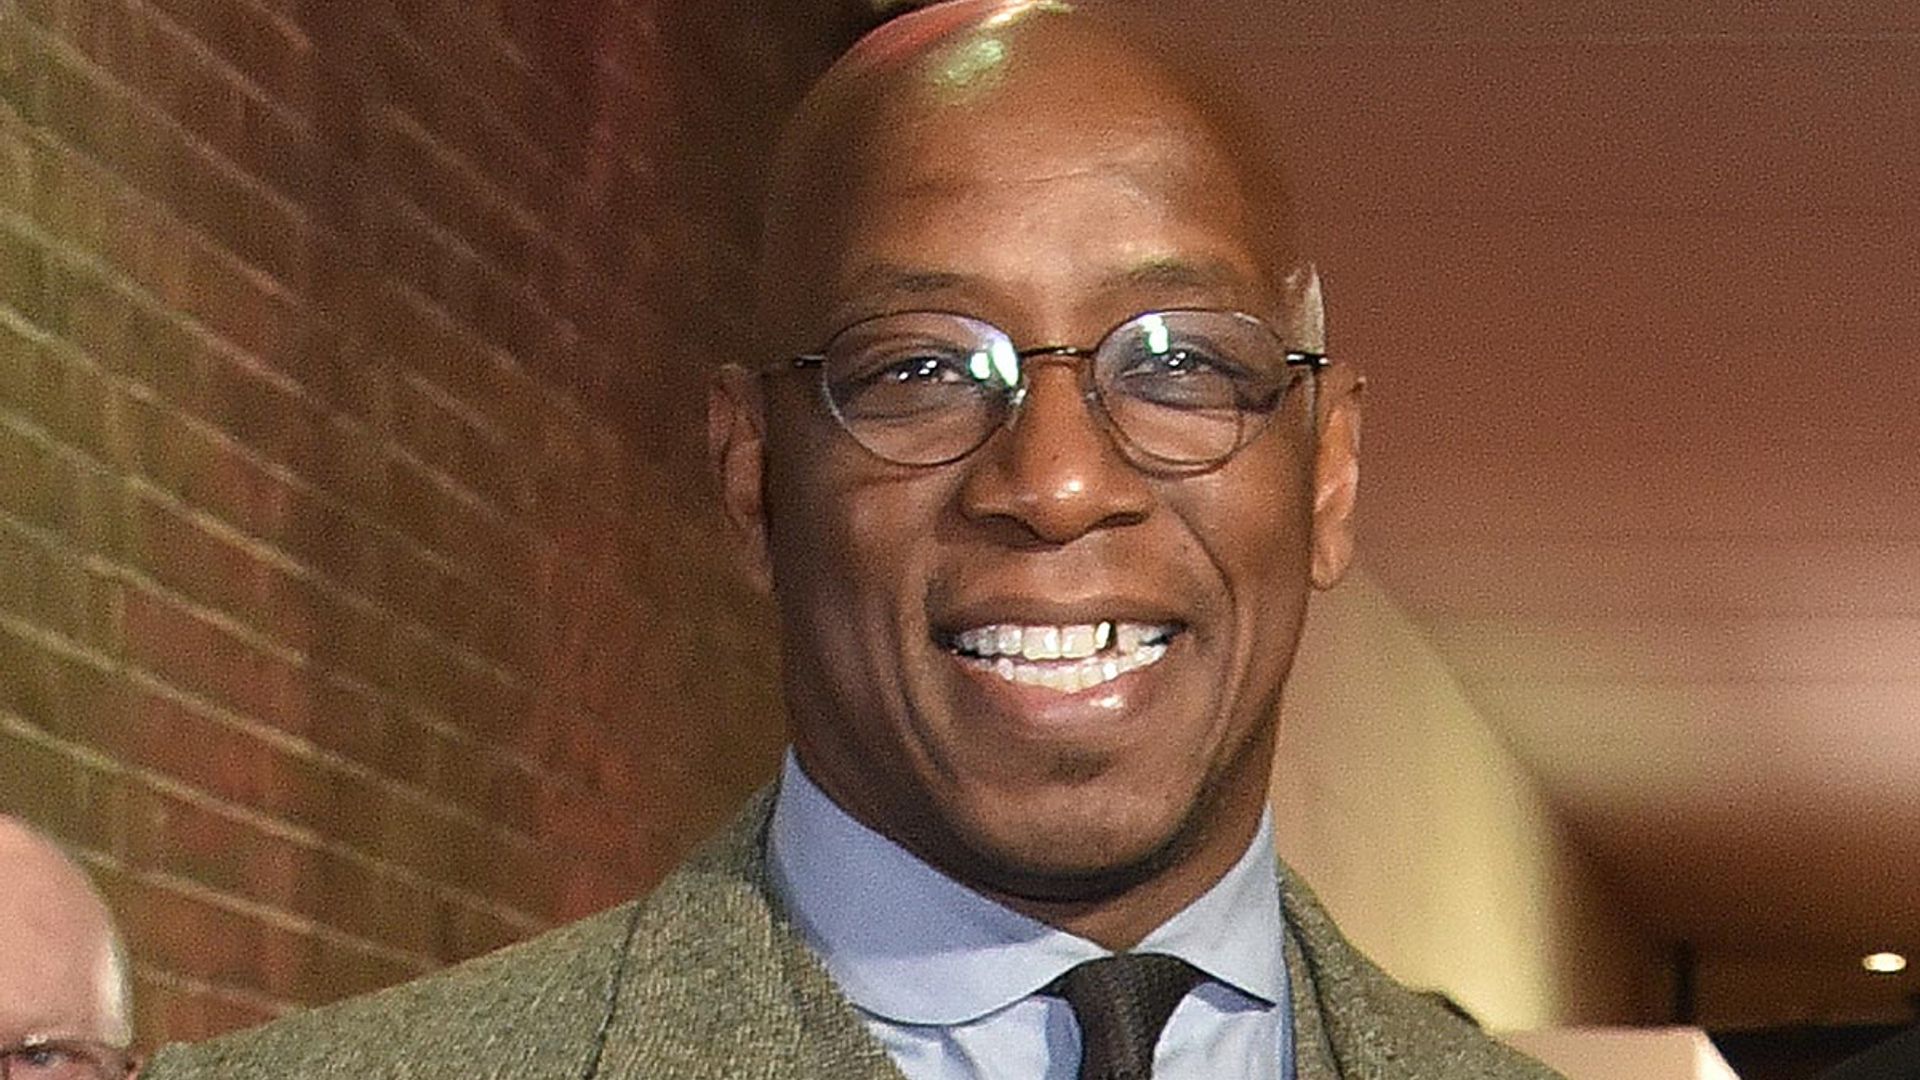 Https://www.hellomagazine.com/imagenes/film/2019111980771/everything-you-need-to-know-about-im-a-celebs-ian-wright/0-389-724/ian--t.jpg?filter=w600&interpolation=lanczos-normal&downsize=0.75xw:*&output-format=progressive-jpeg&output-quality=70